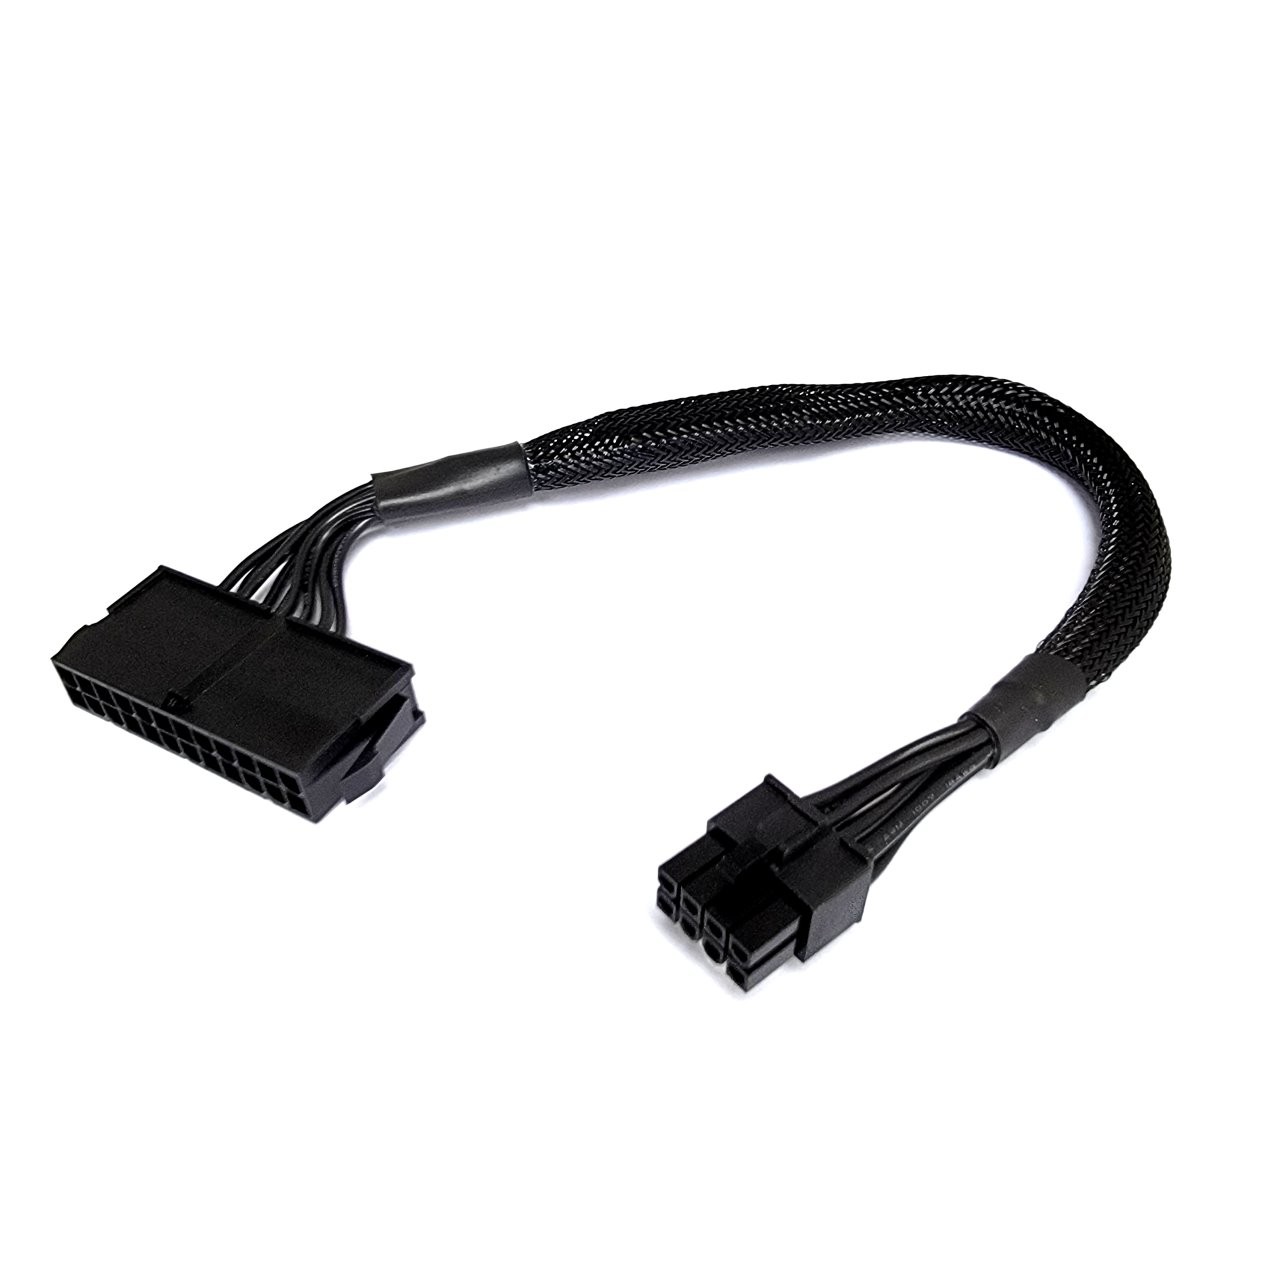 Dell_OptiPlex_3020_PSU_Main_Power_24-Pin_to_8-Pin_Adapter_Cable_%2830cm%29_%281%29__06259_zoom.jpg